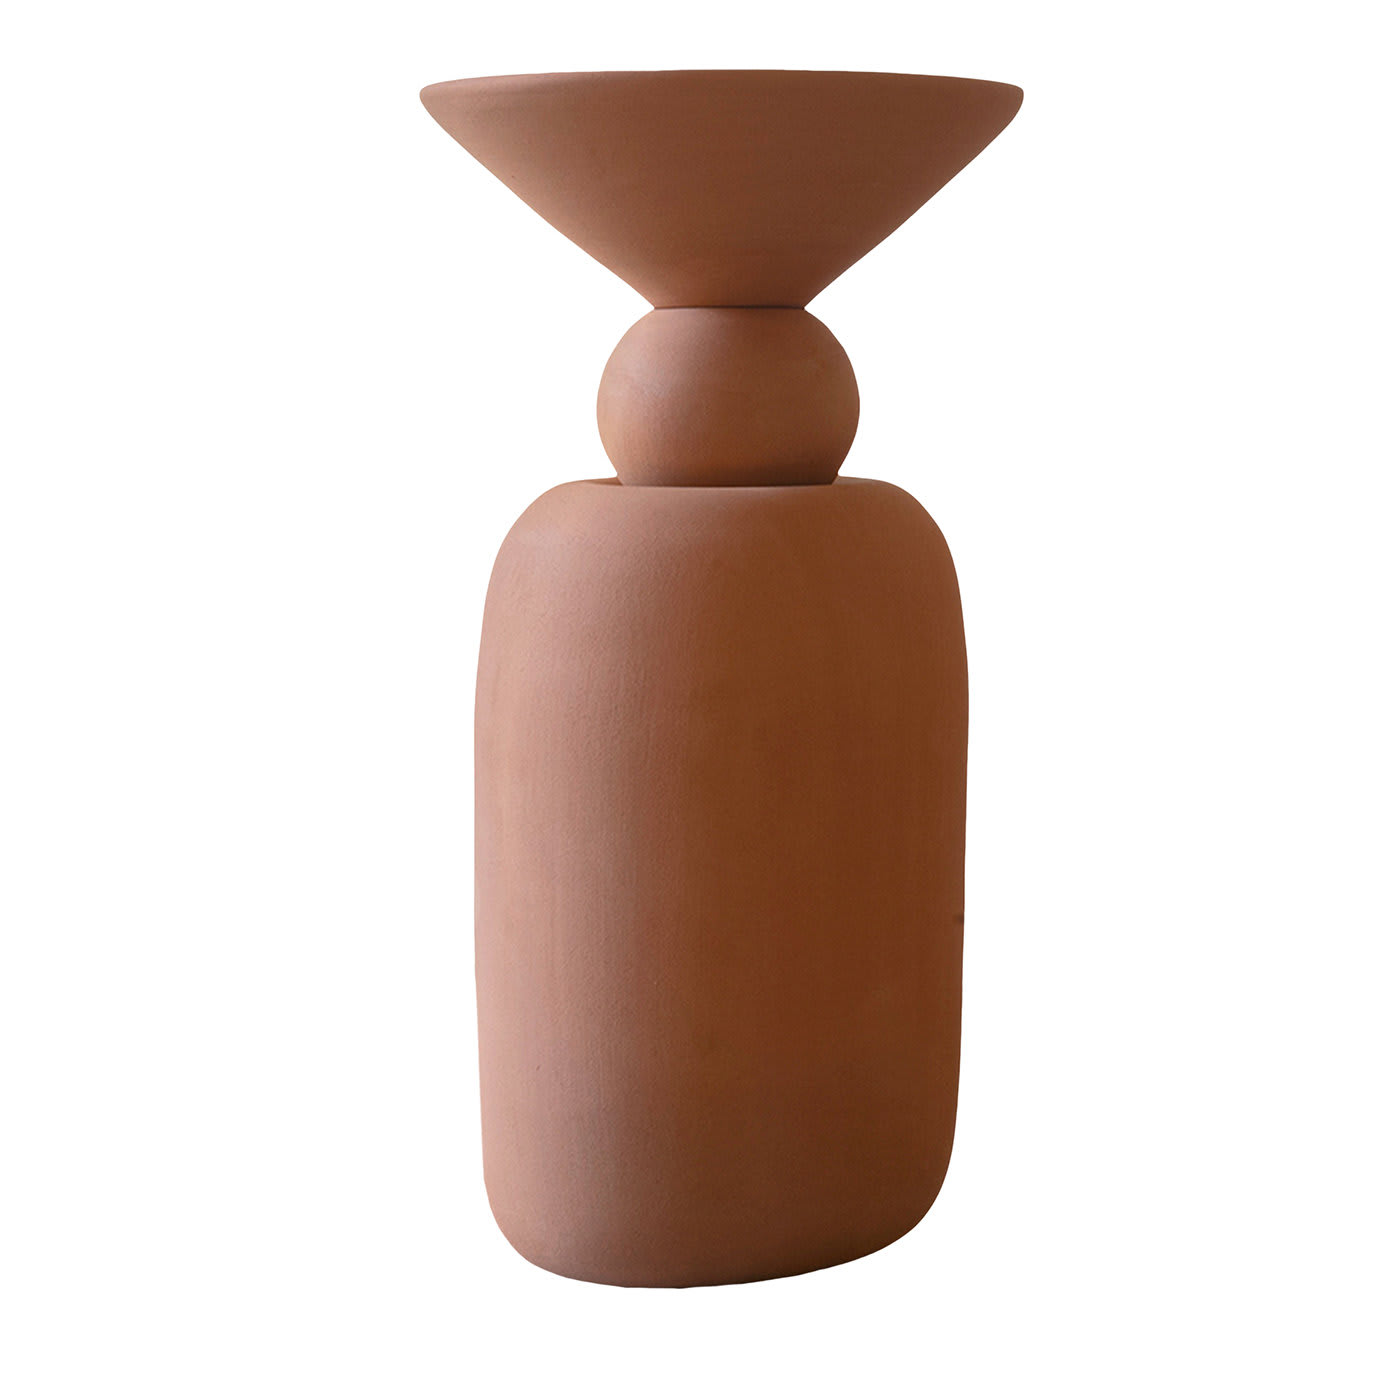 Botanica Large Terracotta Vase with Cone Top  - Gianfranco Conte